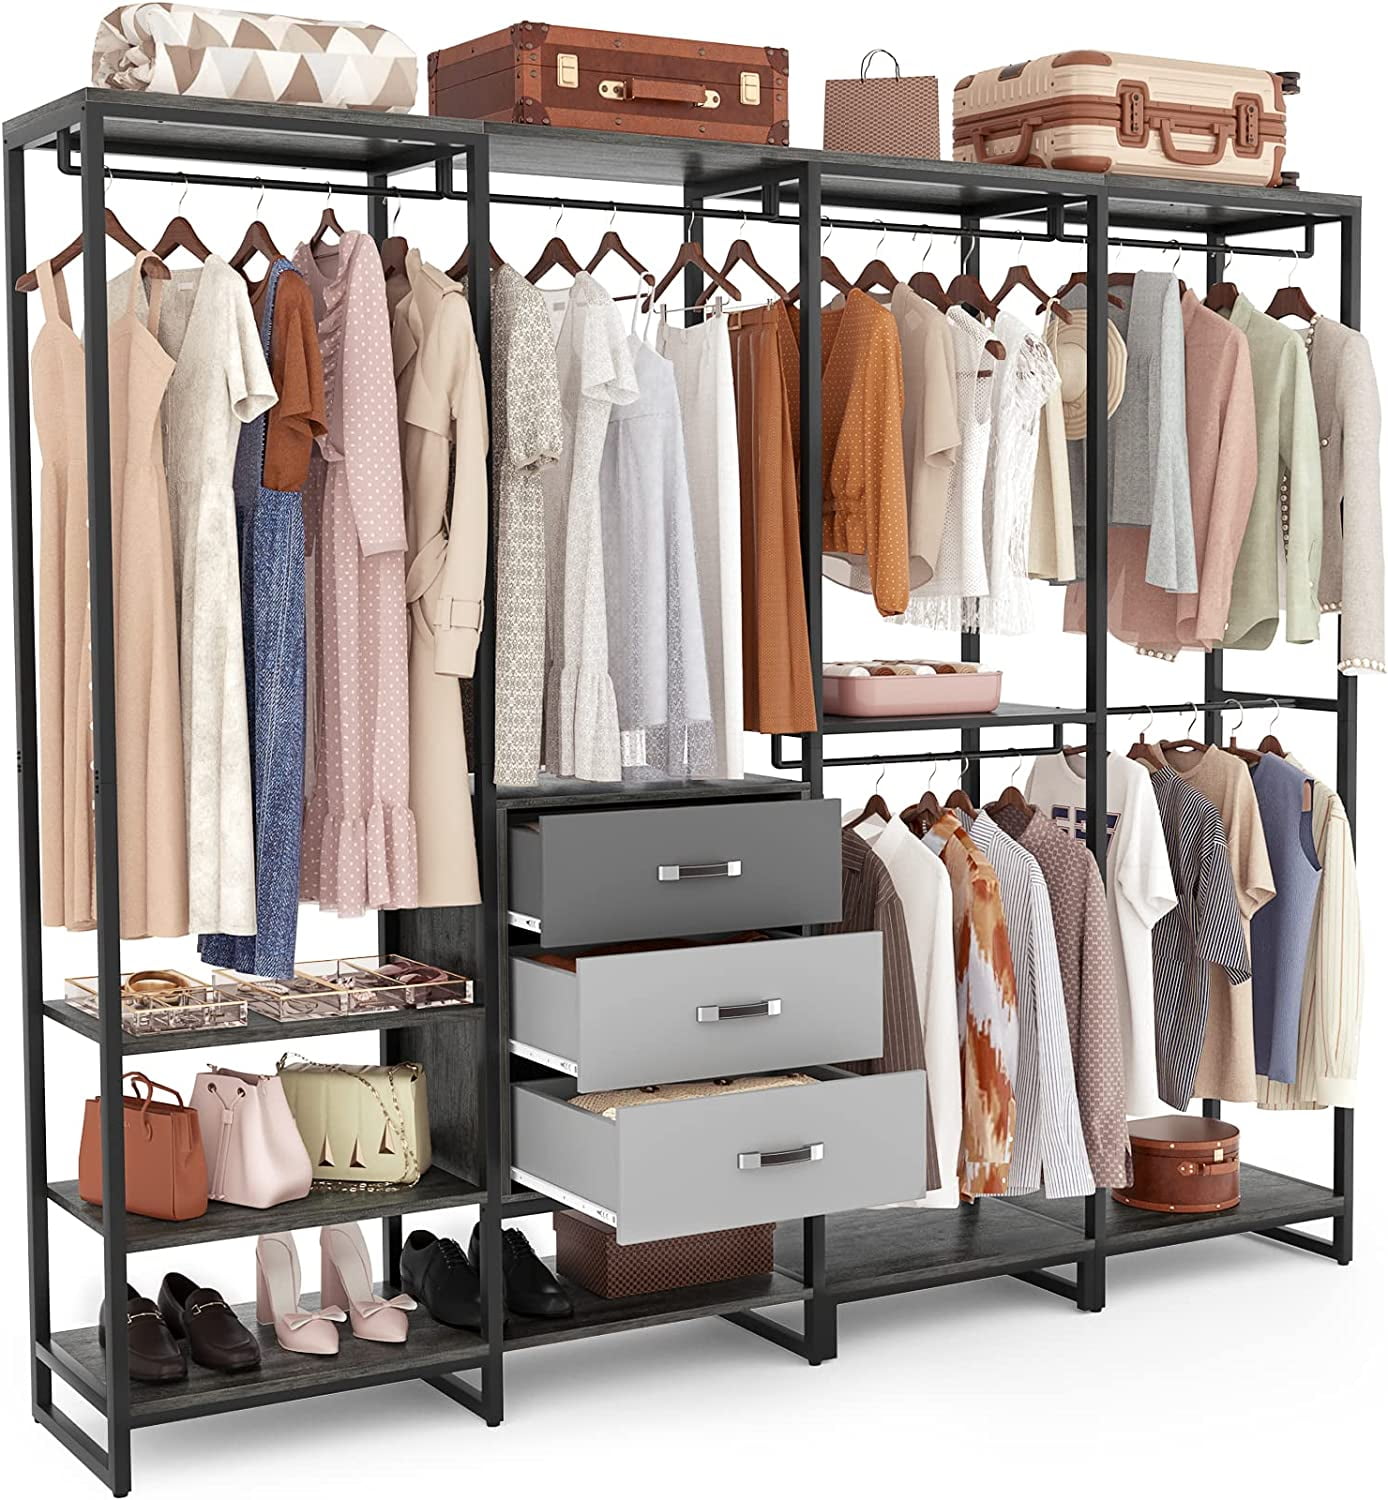 17 Stories Freestanding Closet Organizer Systems With Shelves